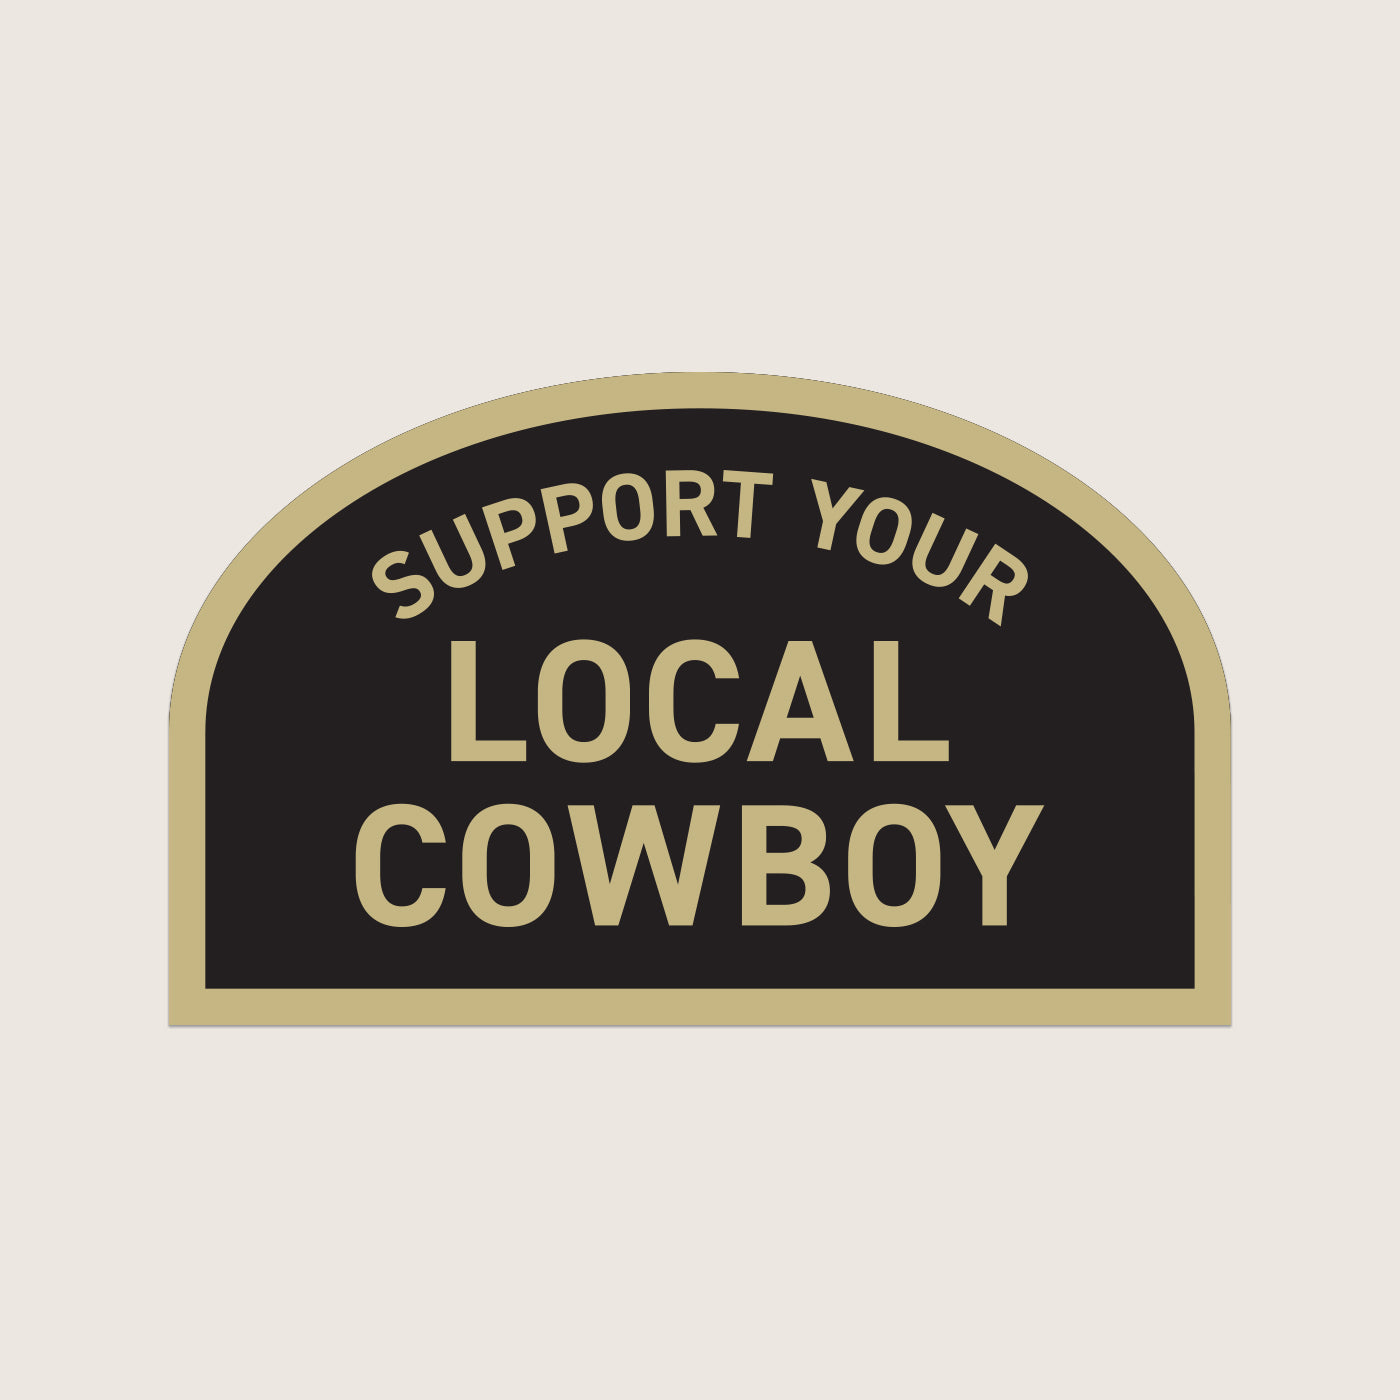 Support Your Local Cowboy Sticker